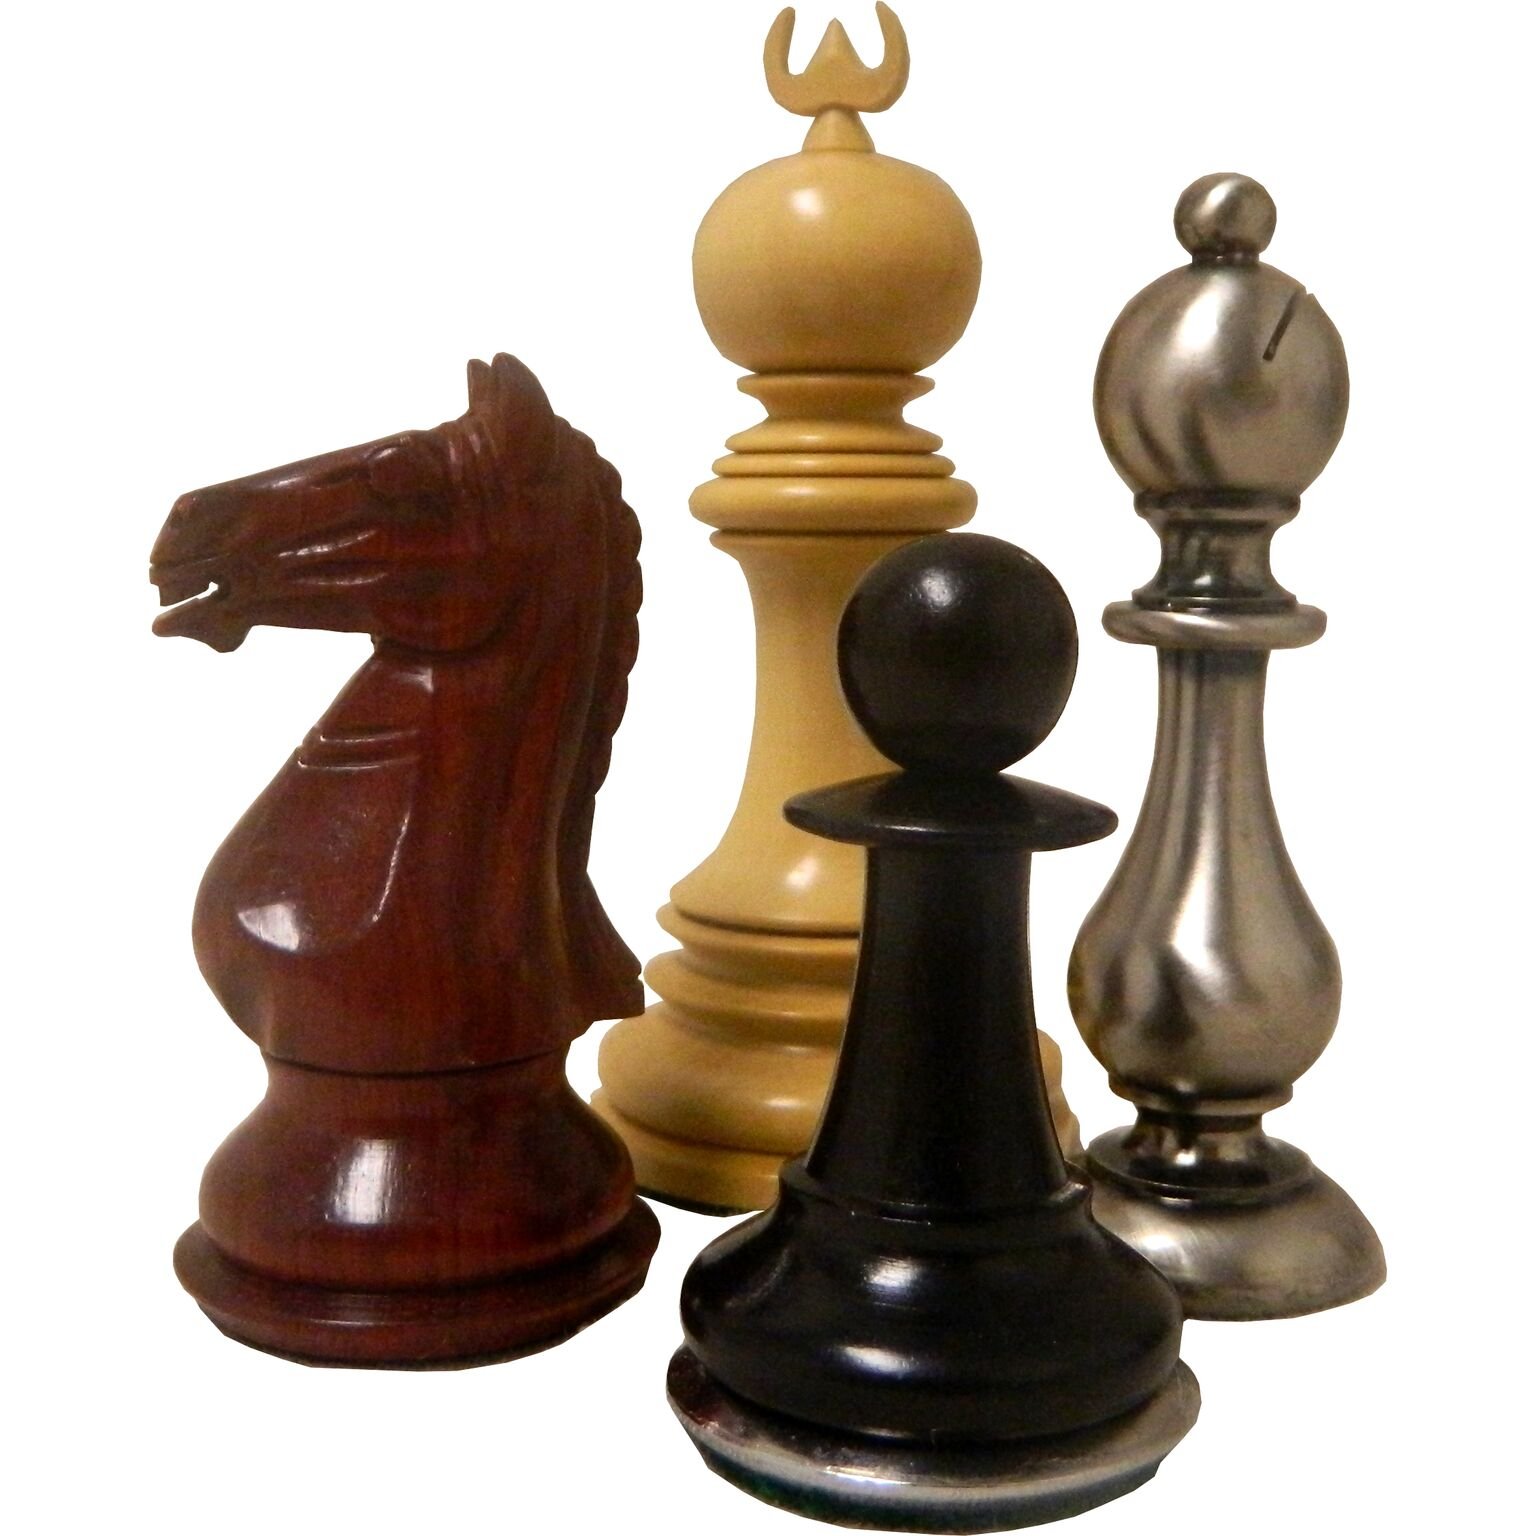 Buy Chess Online  Chess Game Online Shopping at Best Price